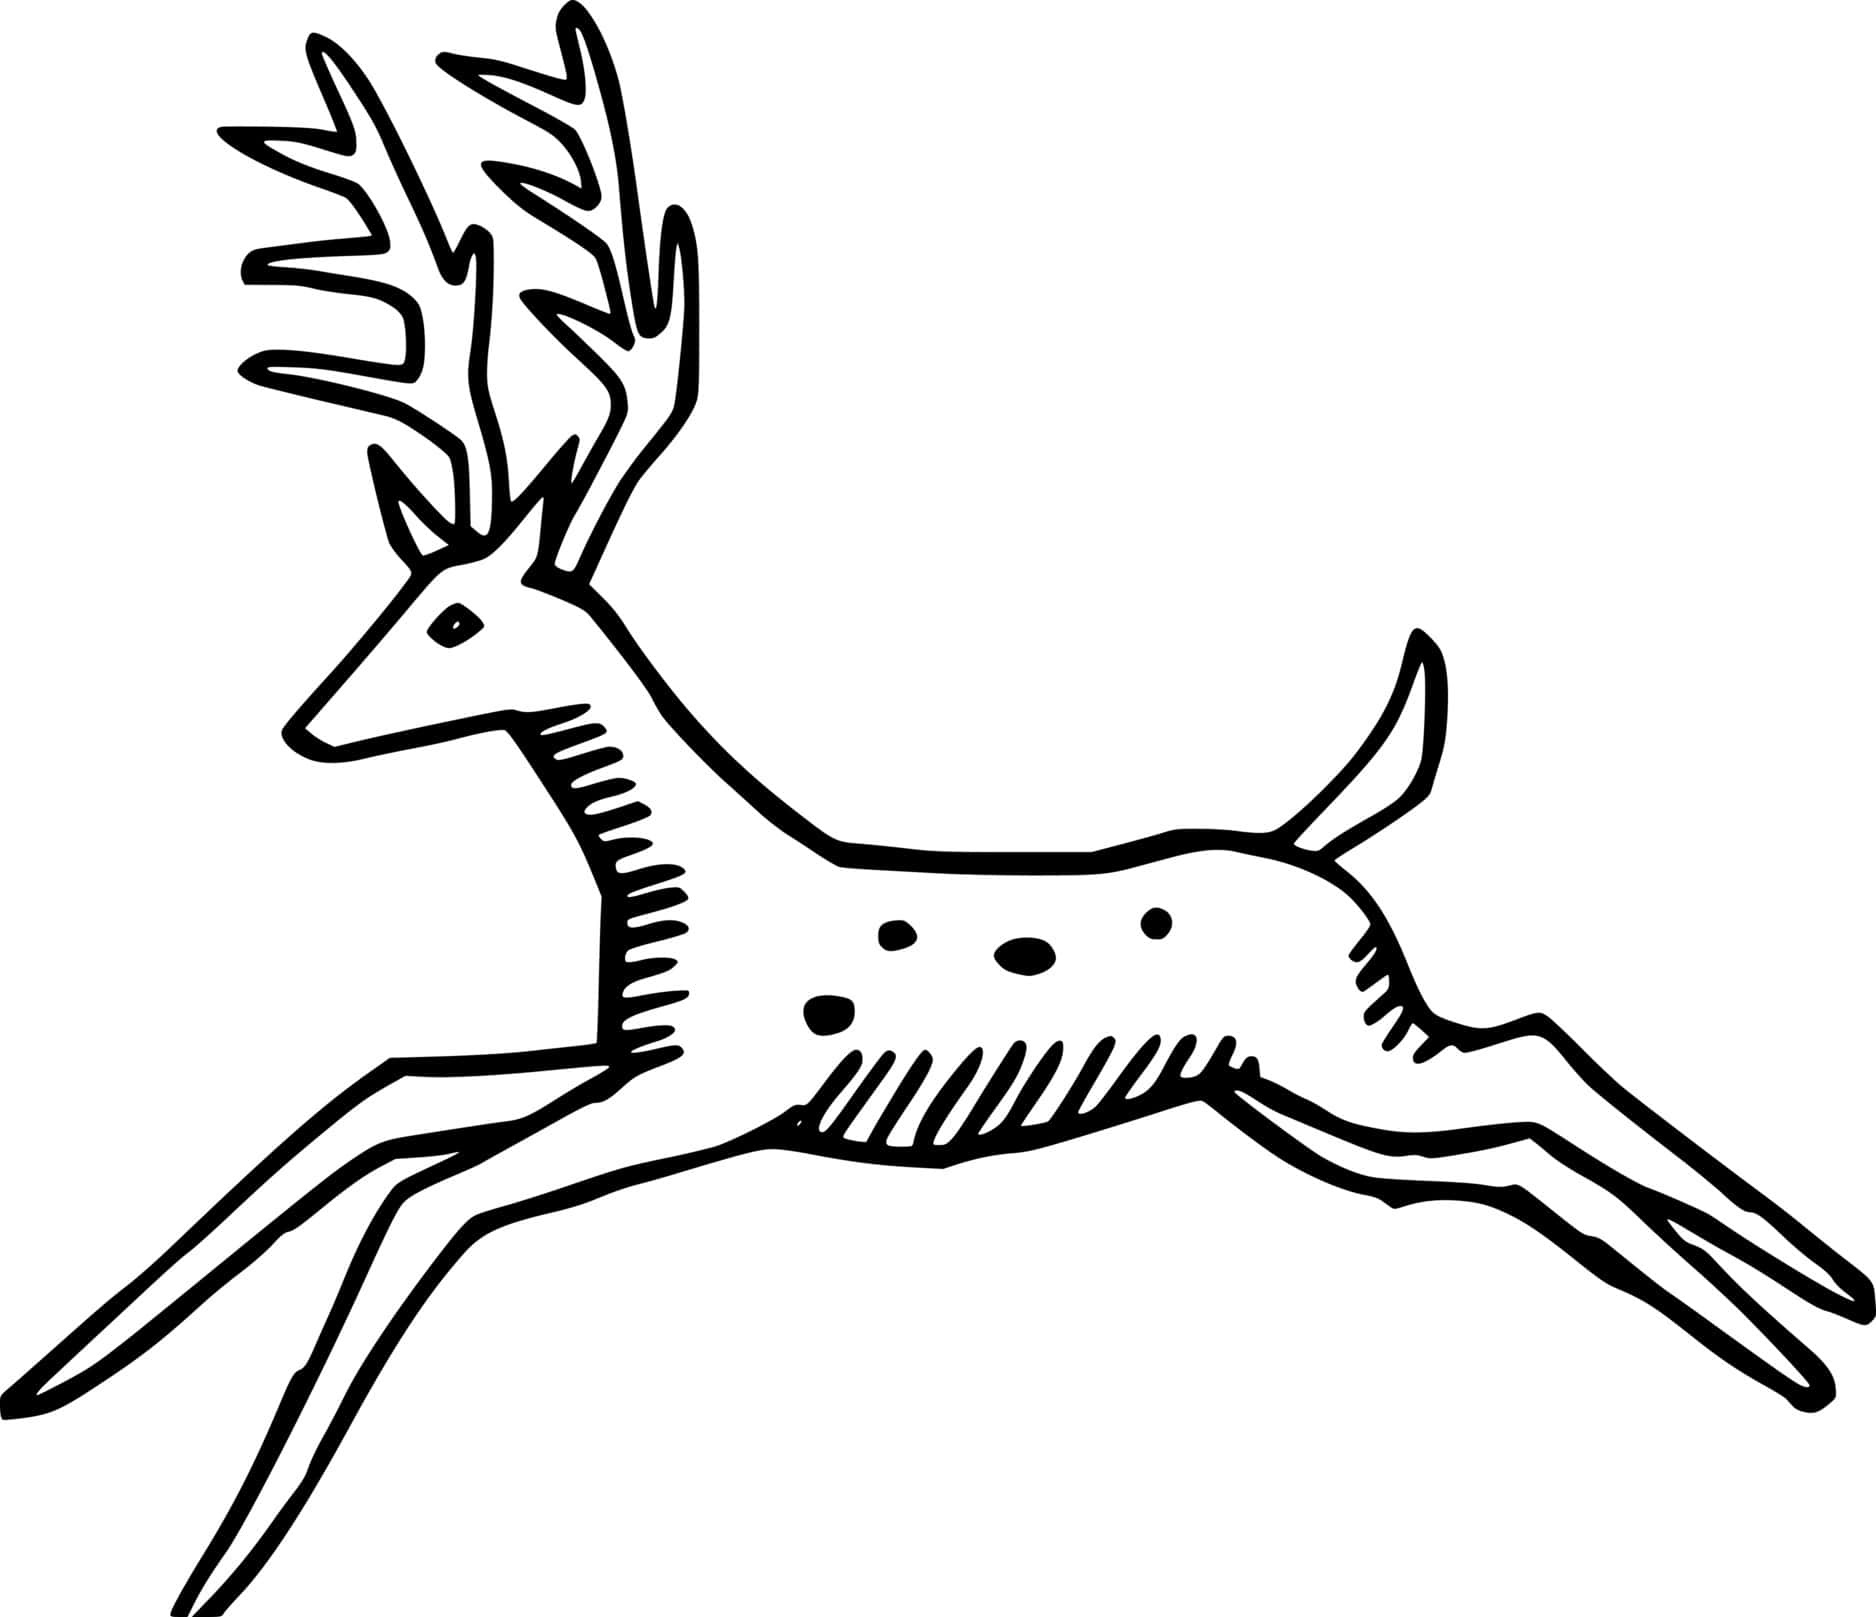 Running Spotted Deer Coloring Page